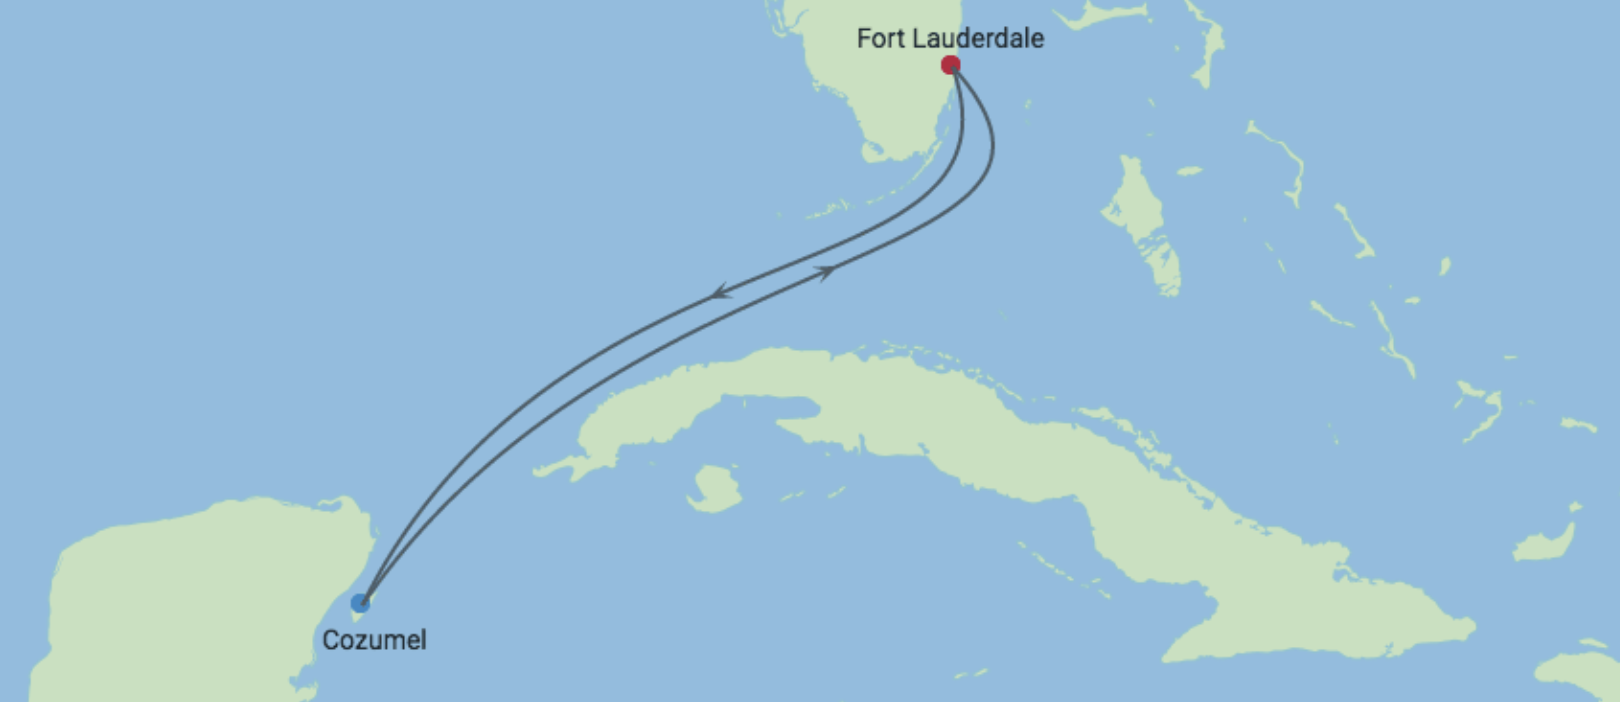 Closed loop trip from Fort Lauderdale to Mexico and back